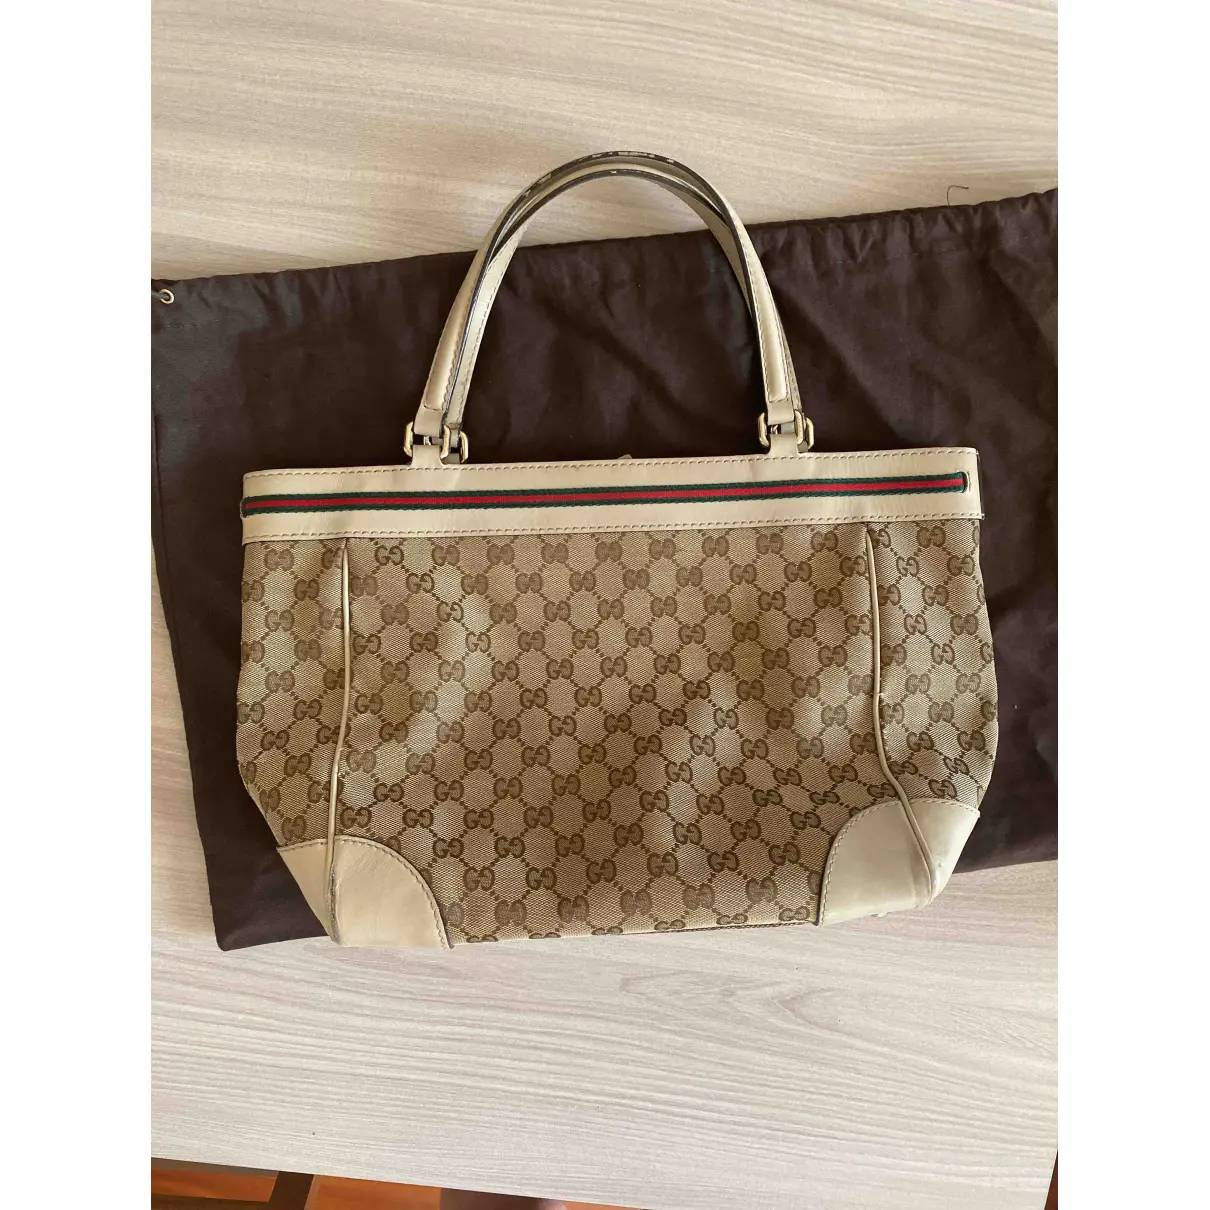 Buy Gucci Boston leather tote online